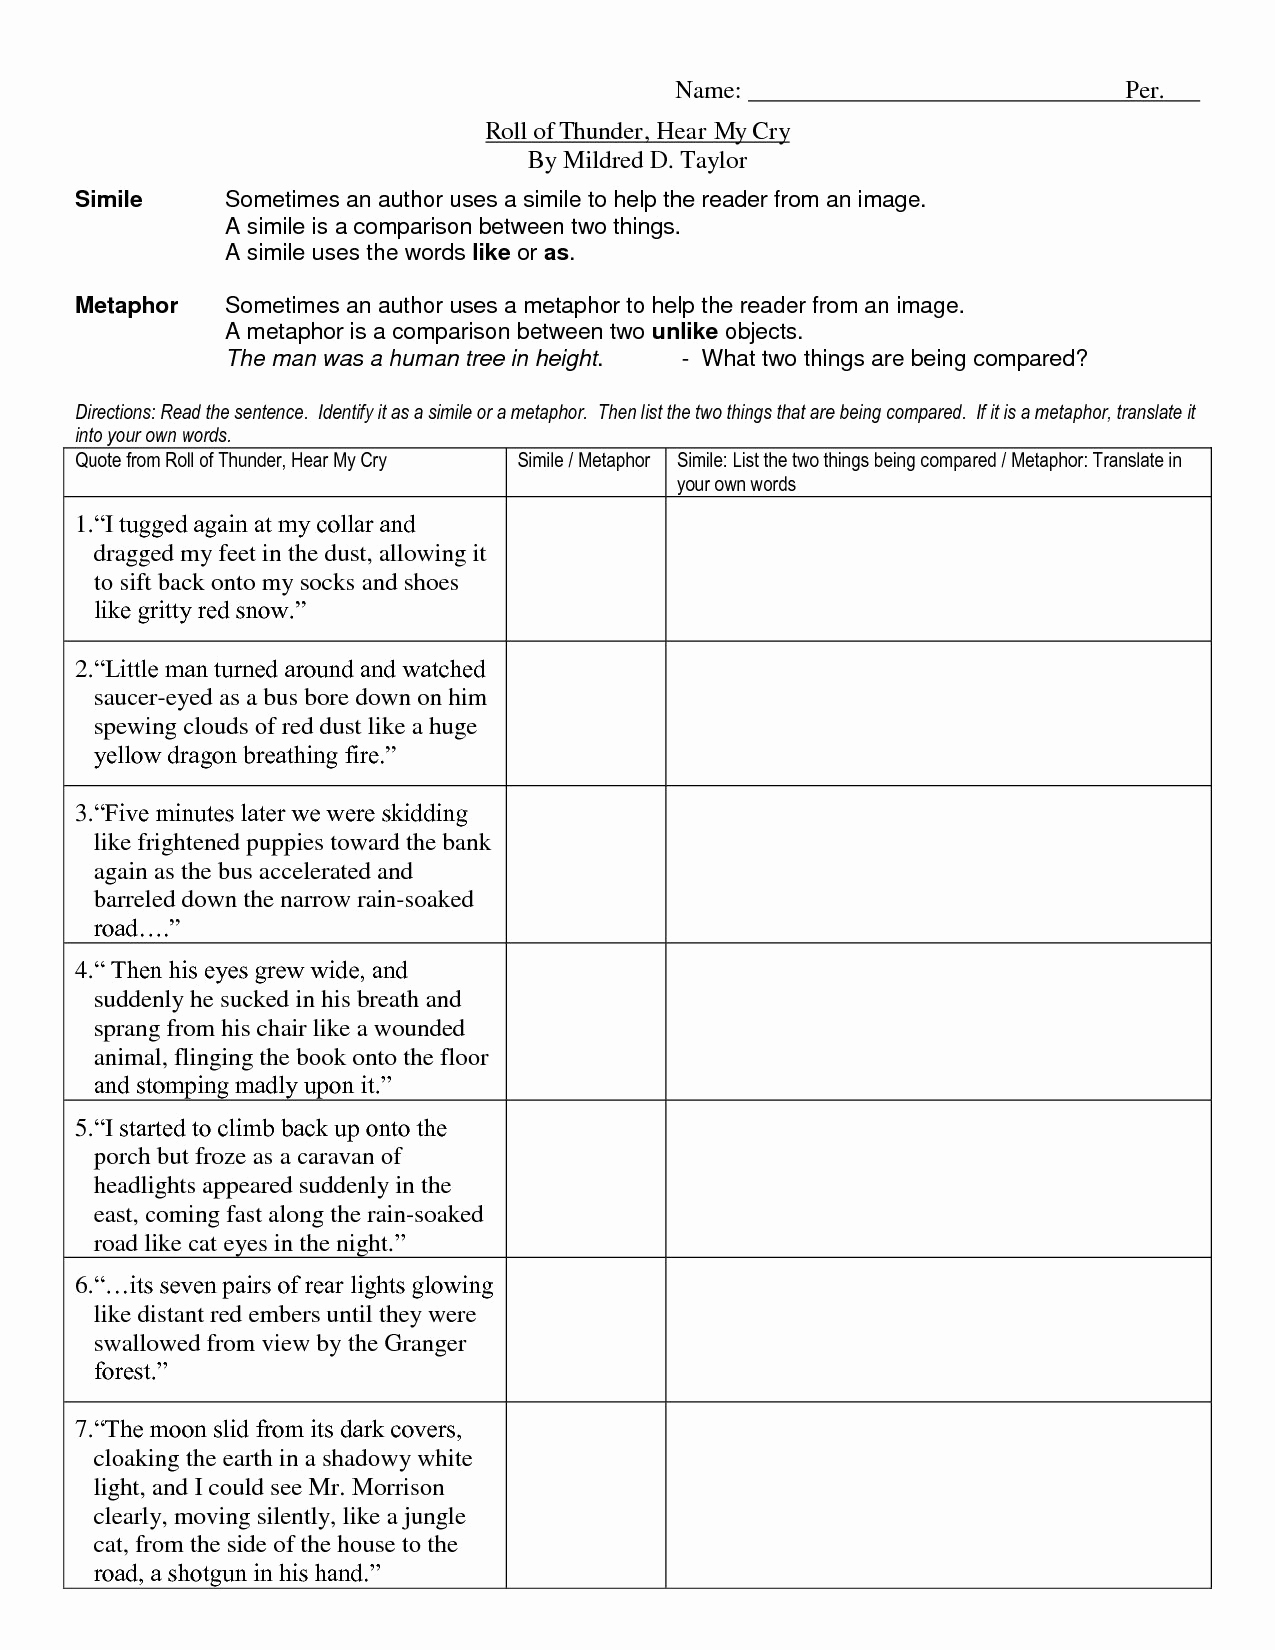 Metaphor Worksheet Middle School Unique Apostrophe Worksheets with Answer Key